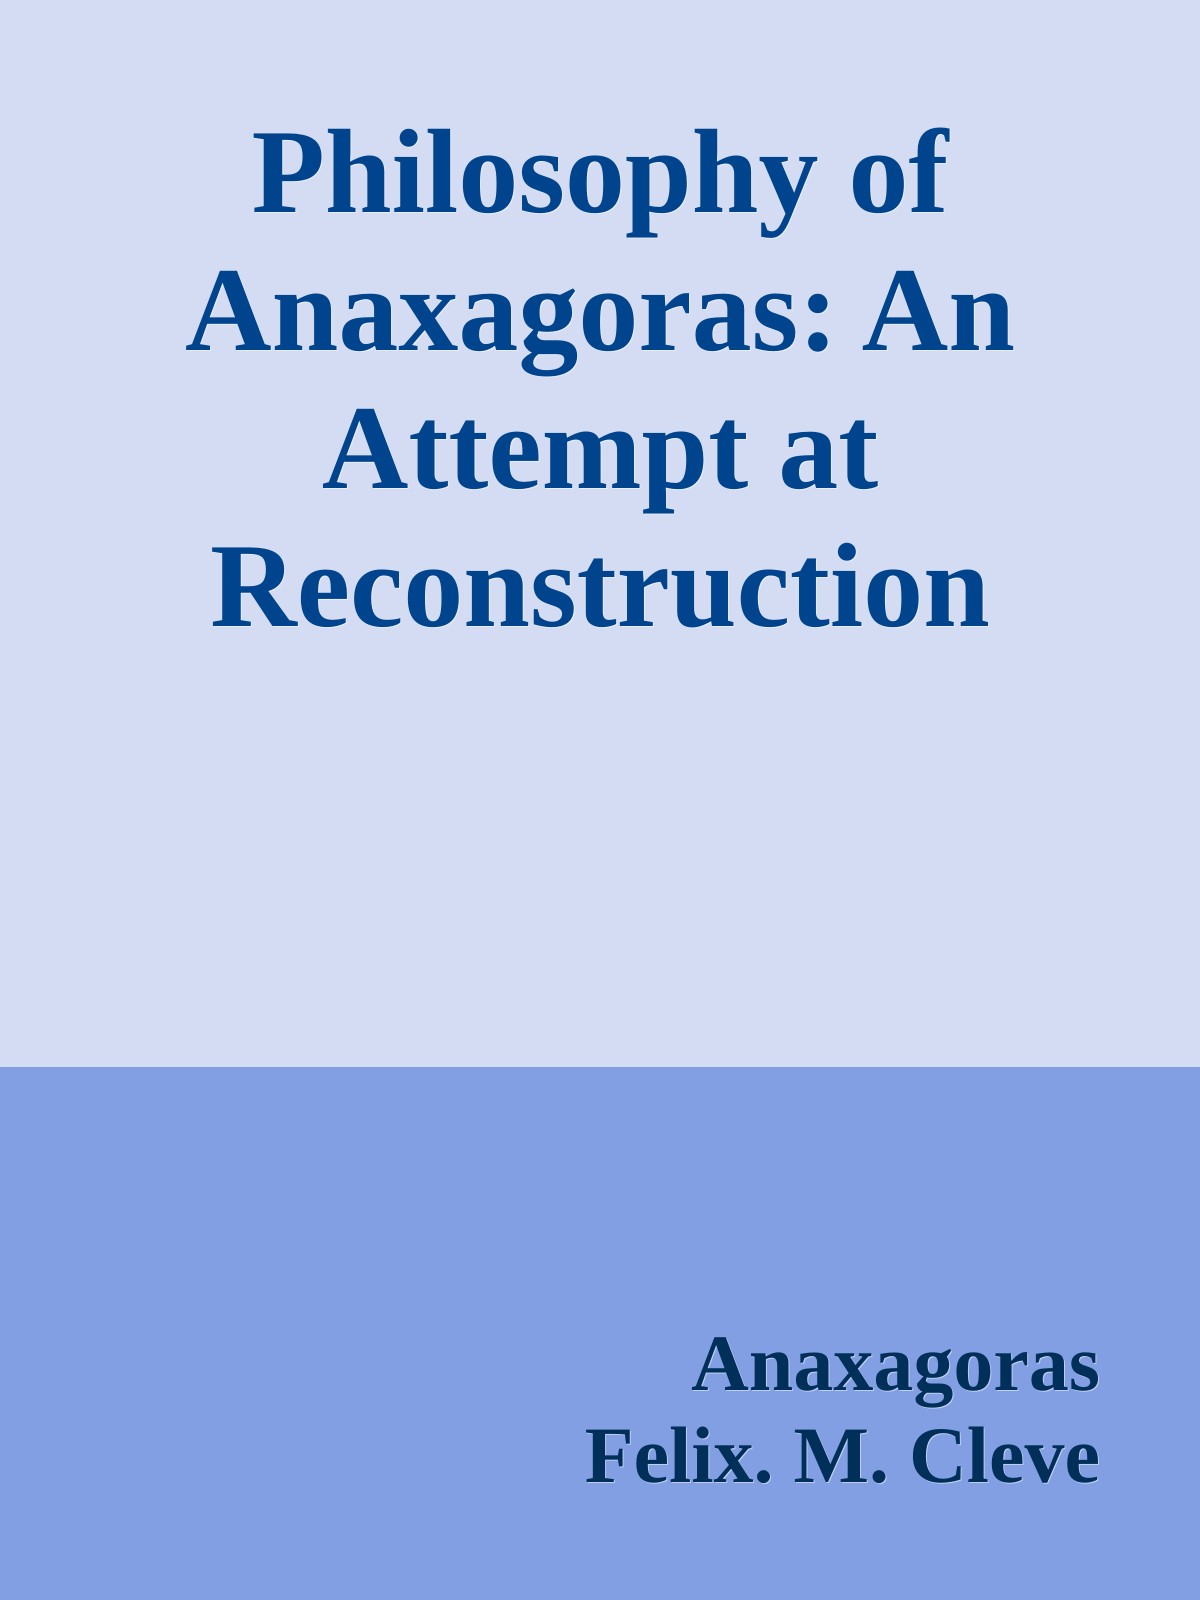 Philosophy of Anaxagoras: An Attempt at Reconstruction